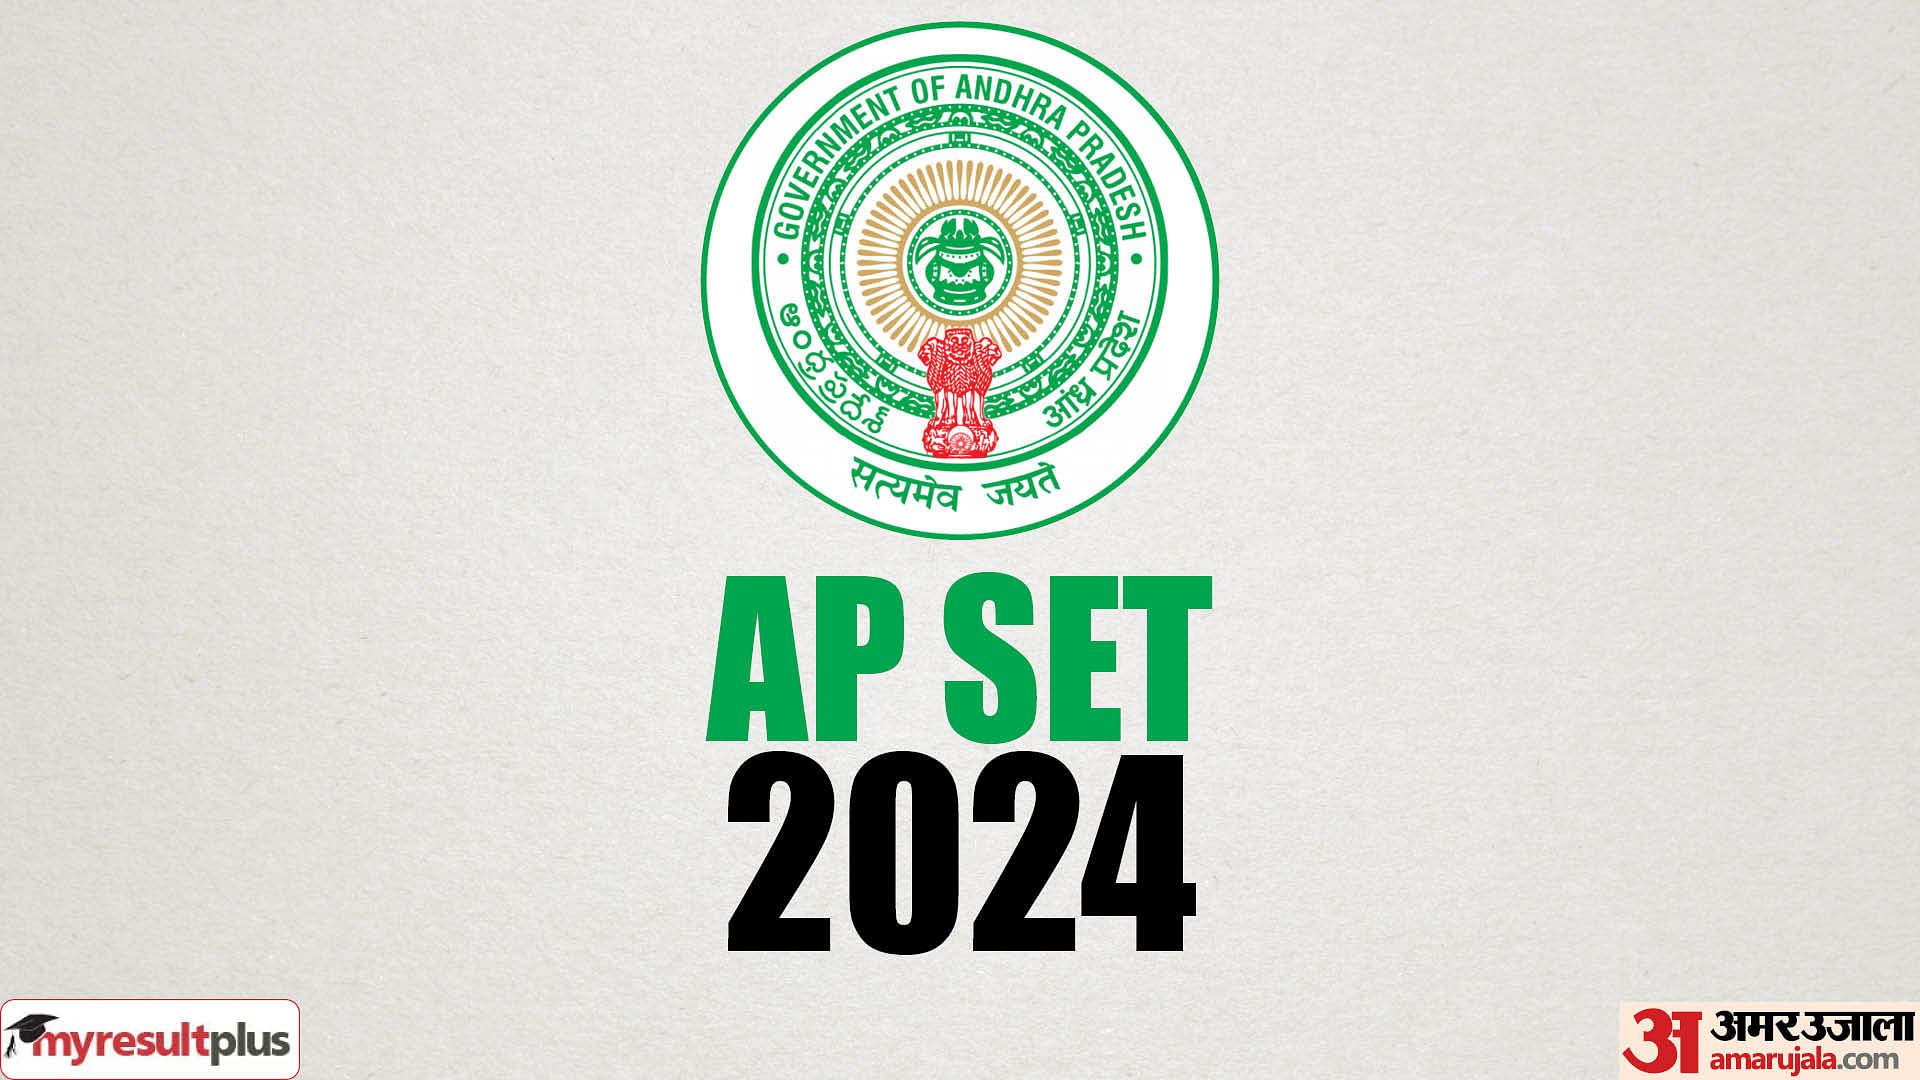 AP SET 2024 admit card released, Download and check exam date now at apset.net.in